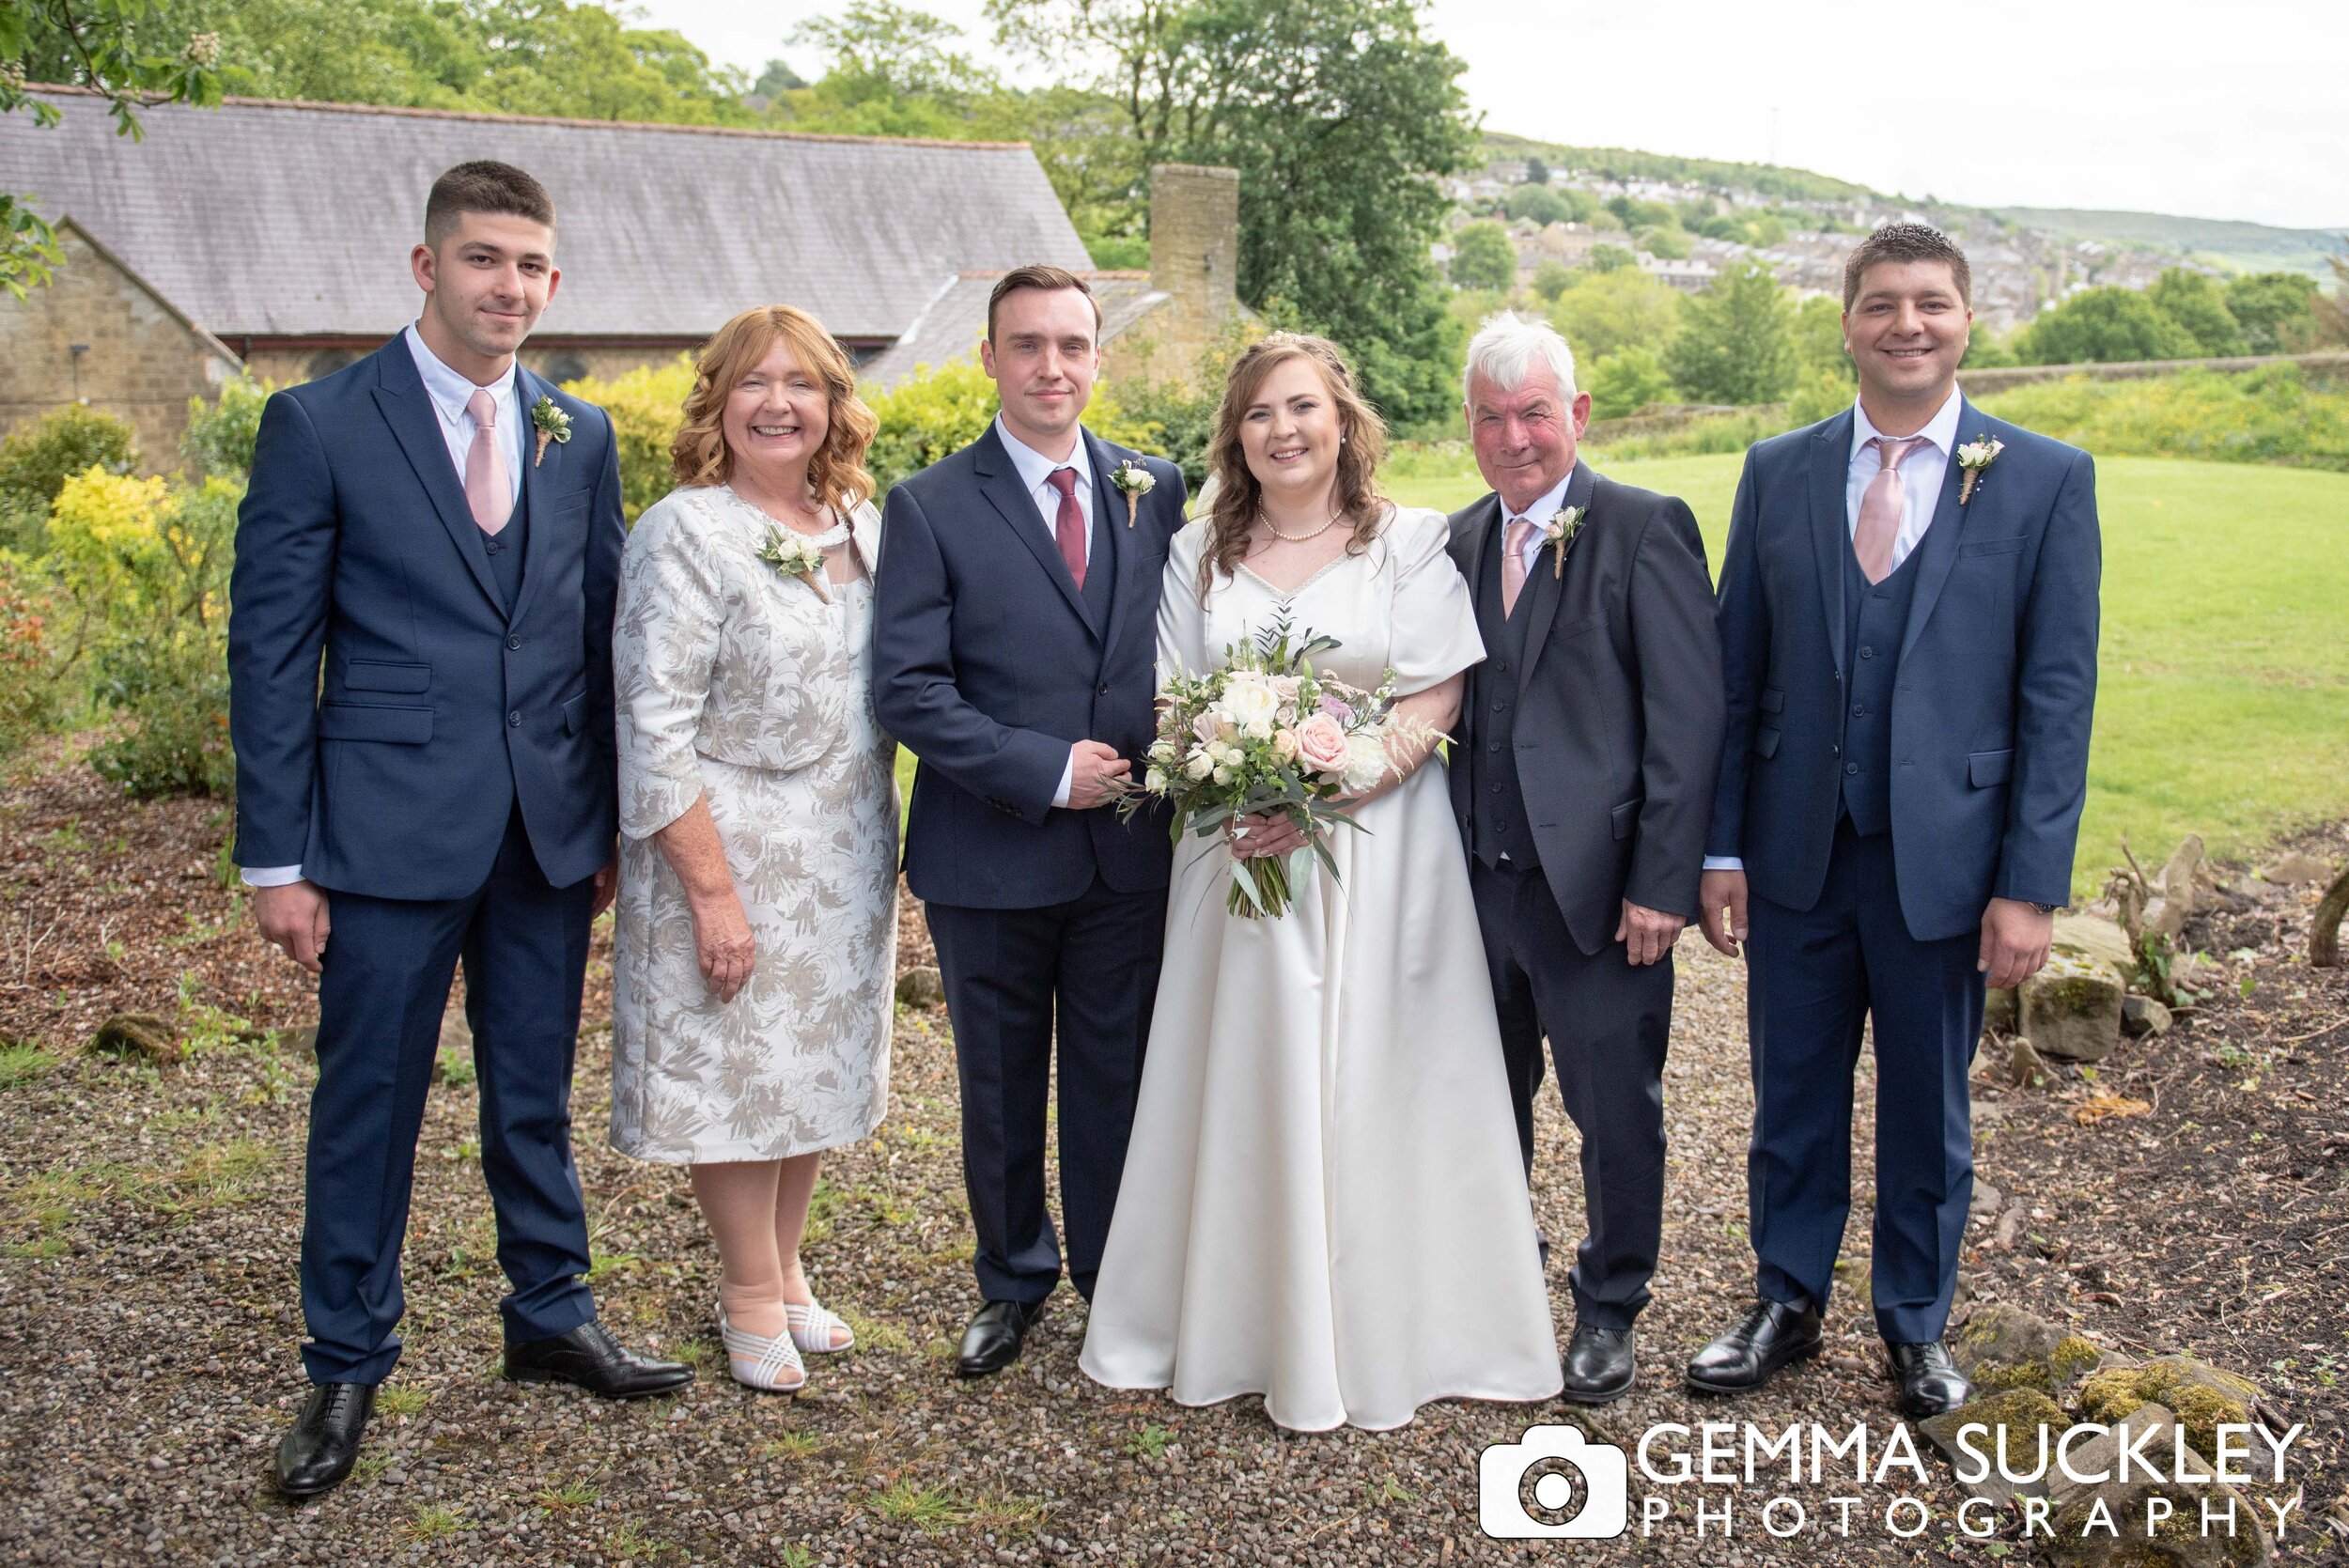 formal wedding photo of the bride and groom with family